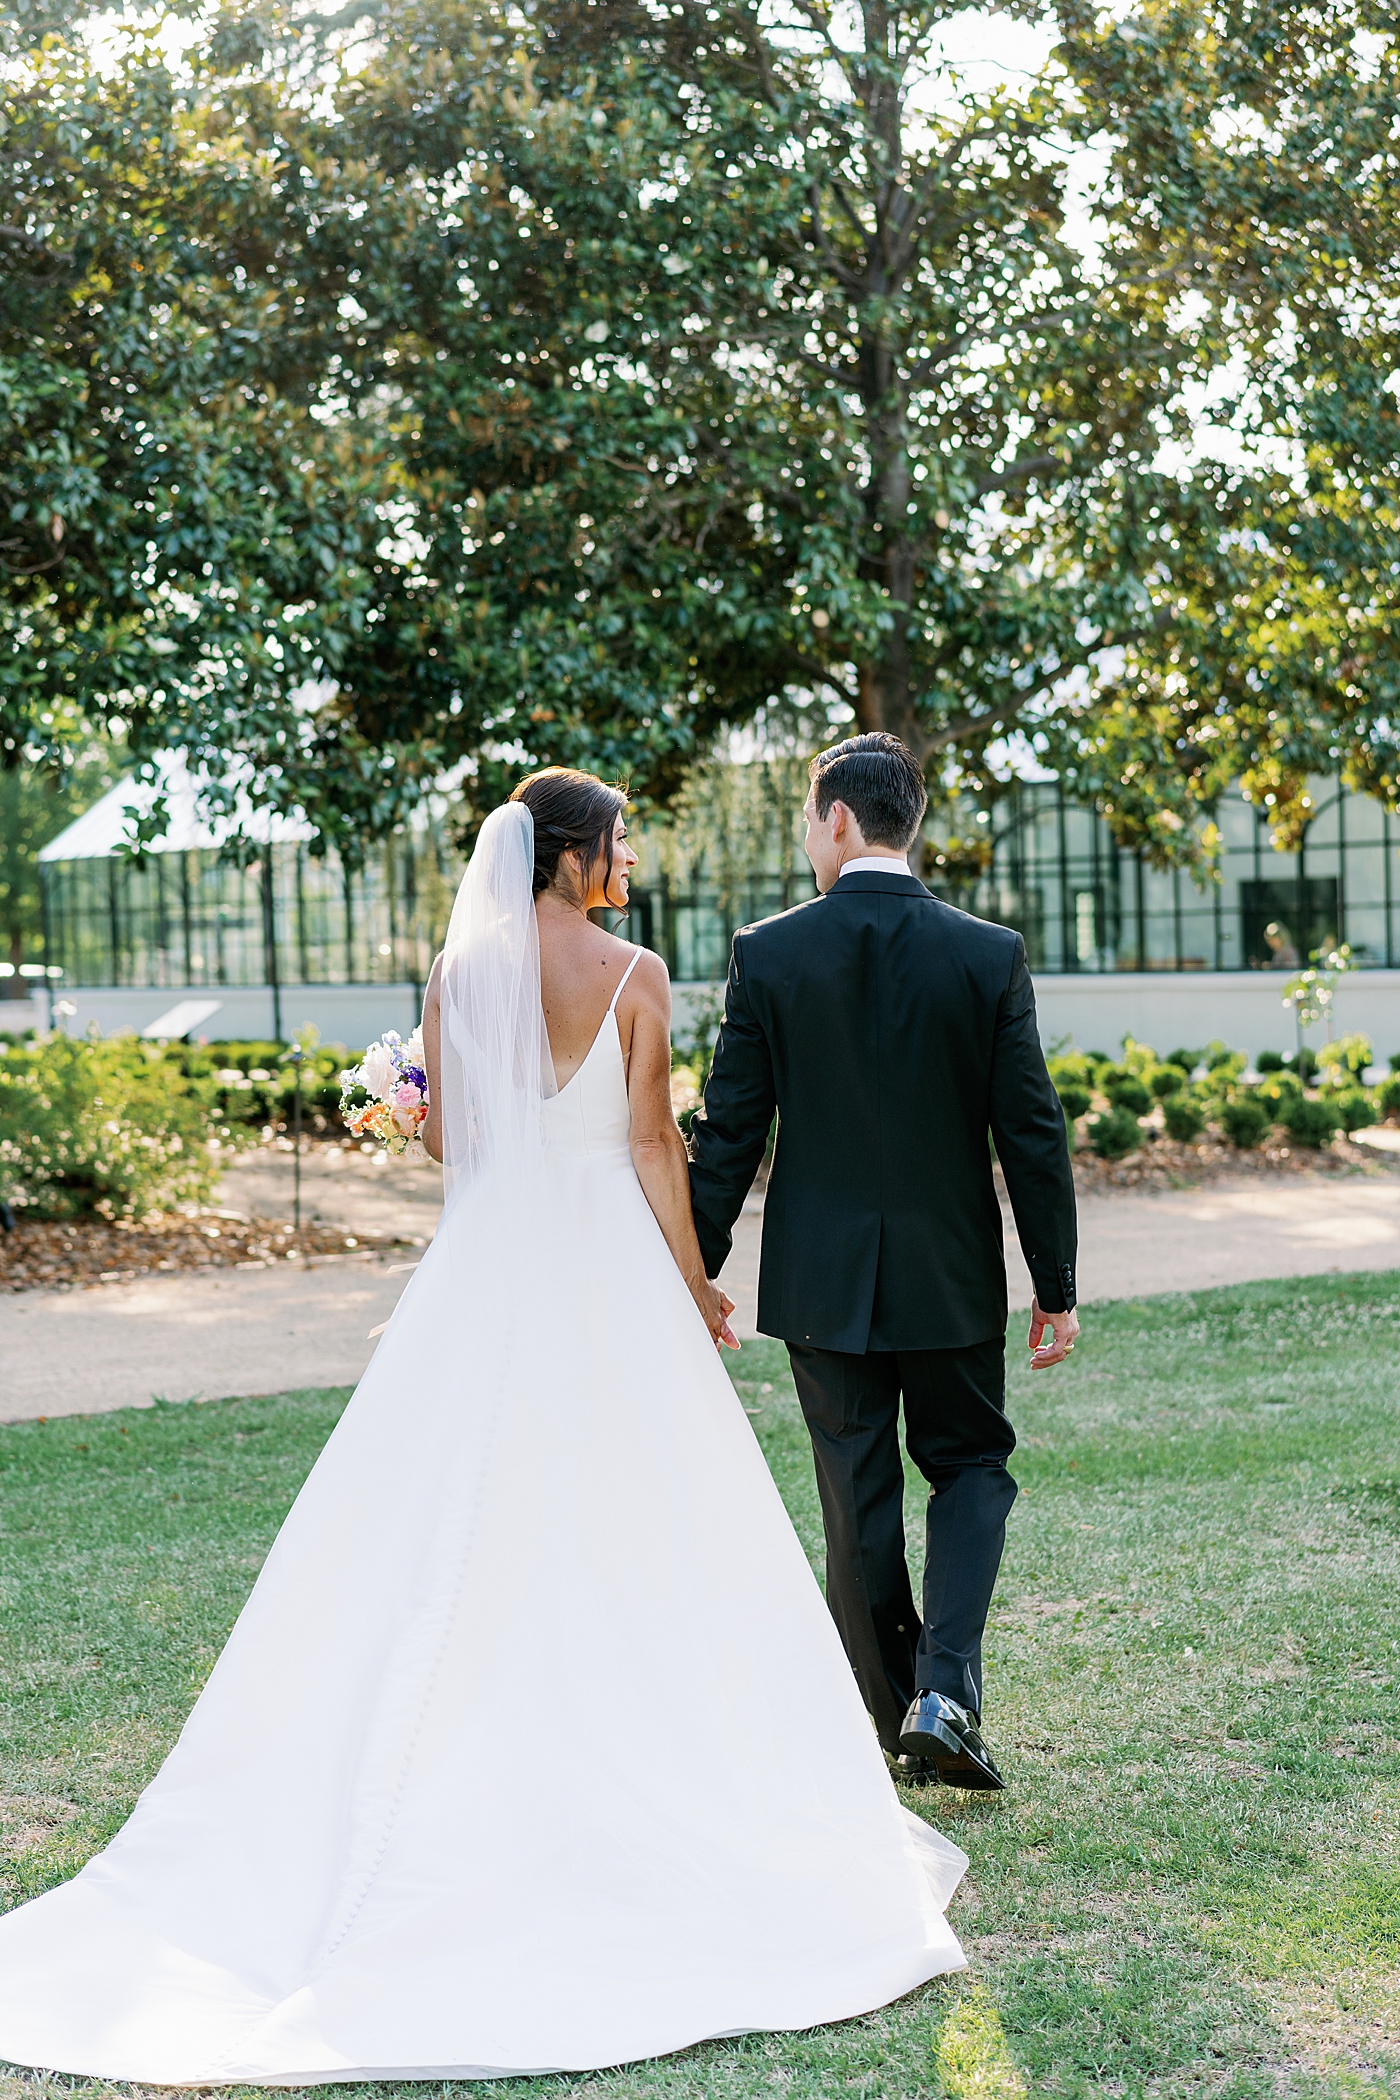 Bride and groom walking together during summer inspired garden wedding | Photo by Annie Laura Photo